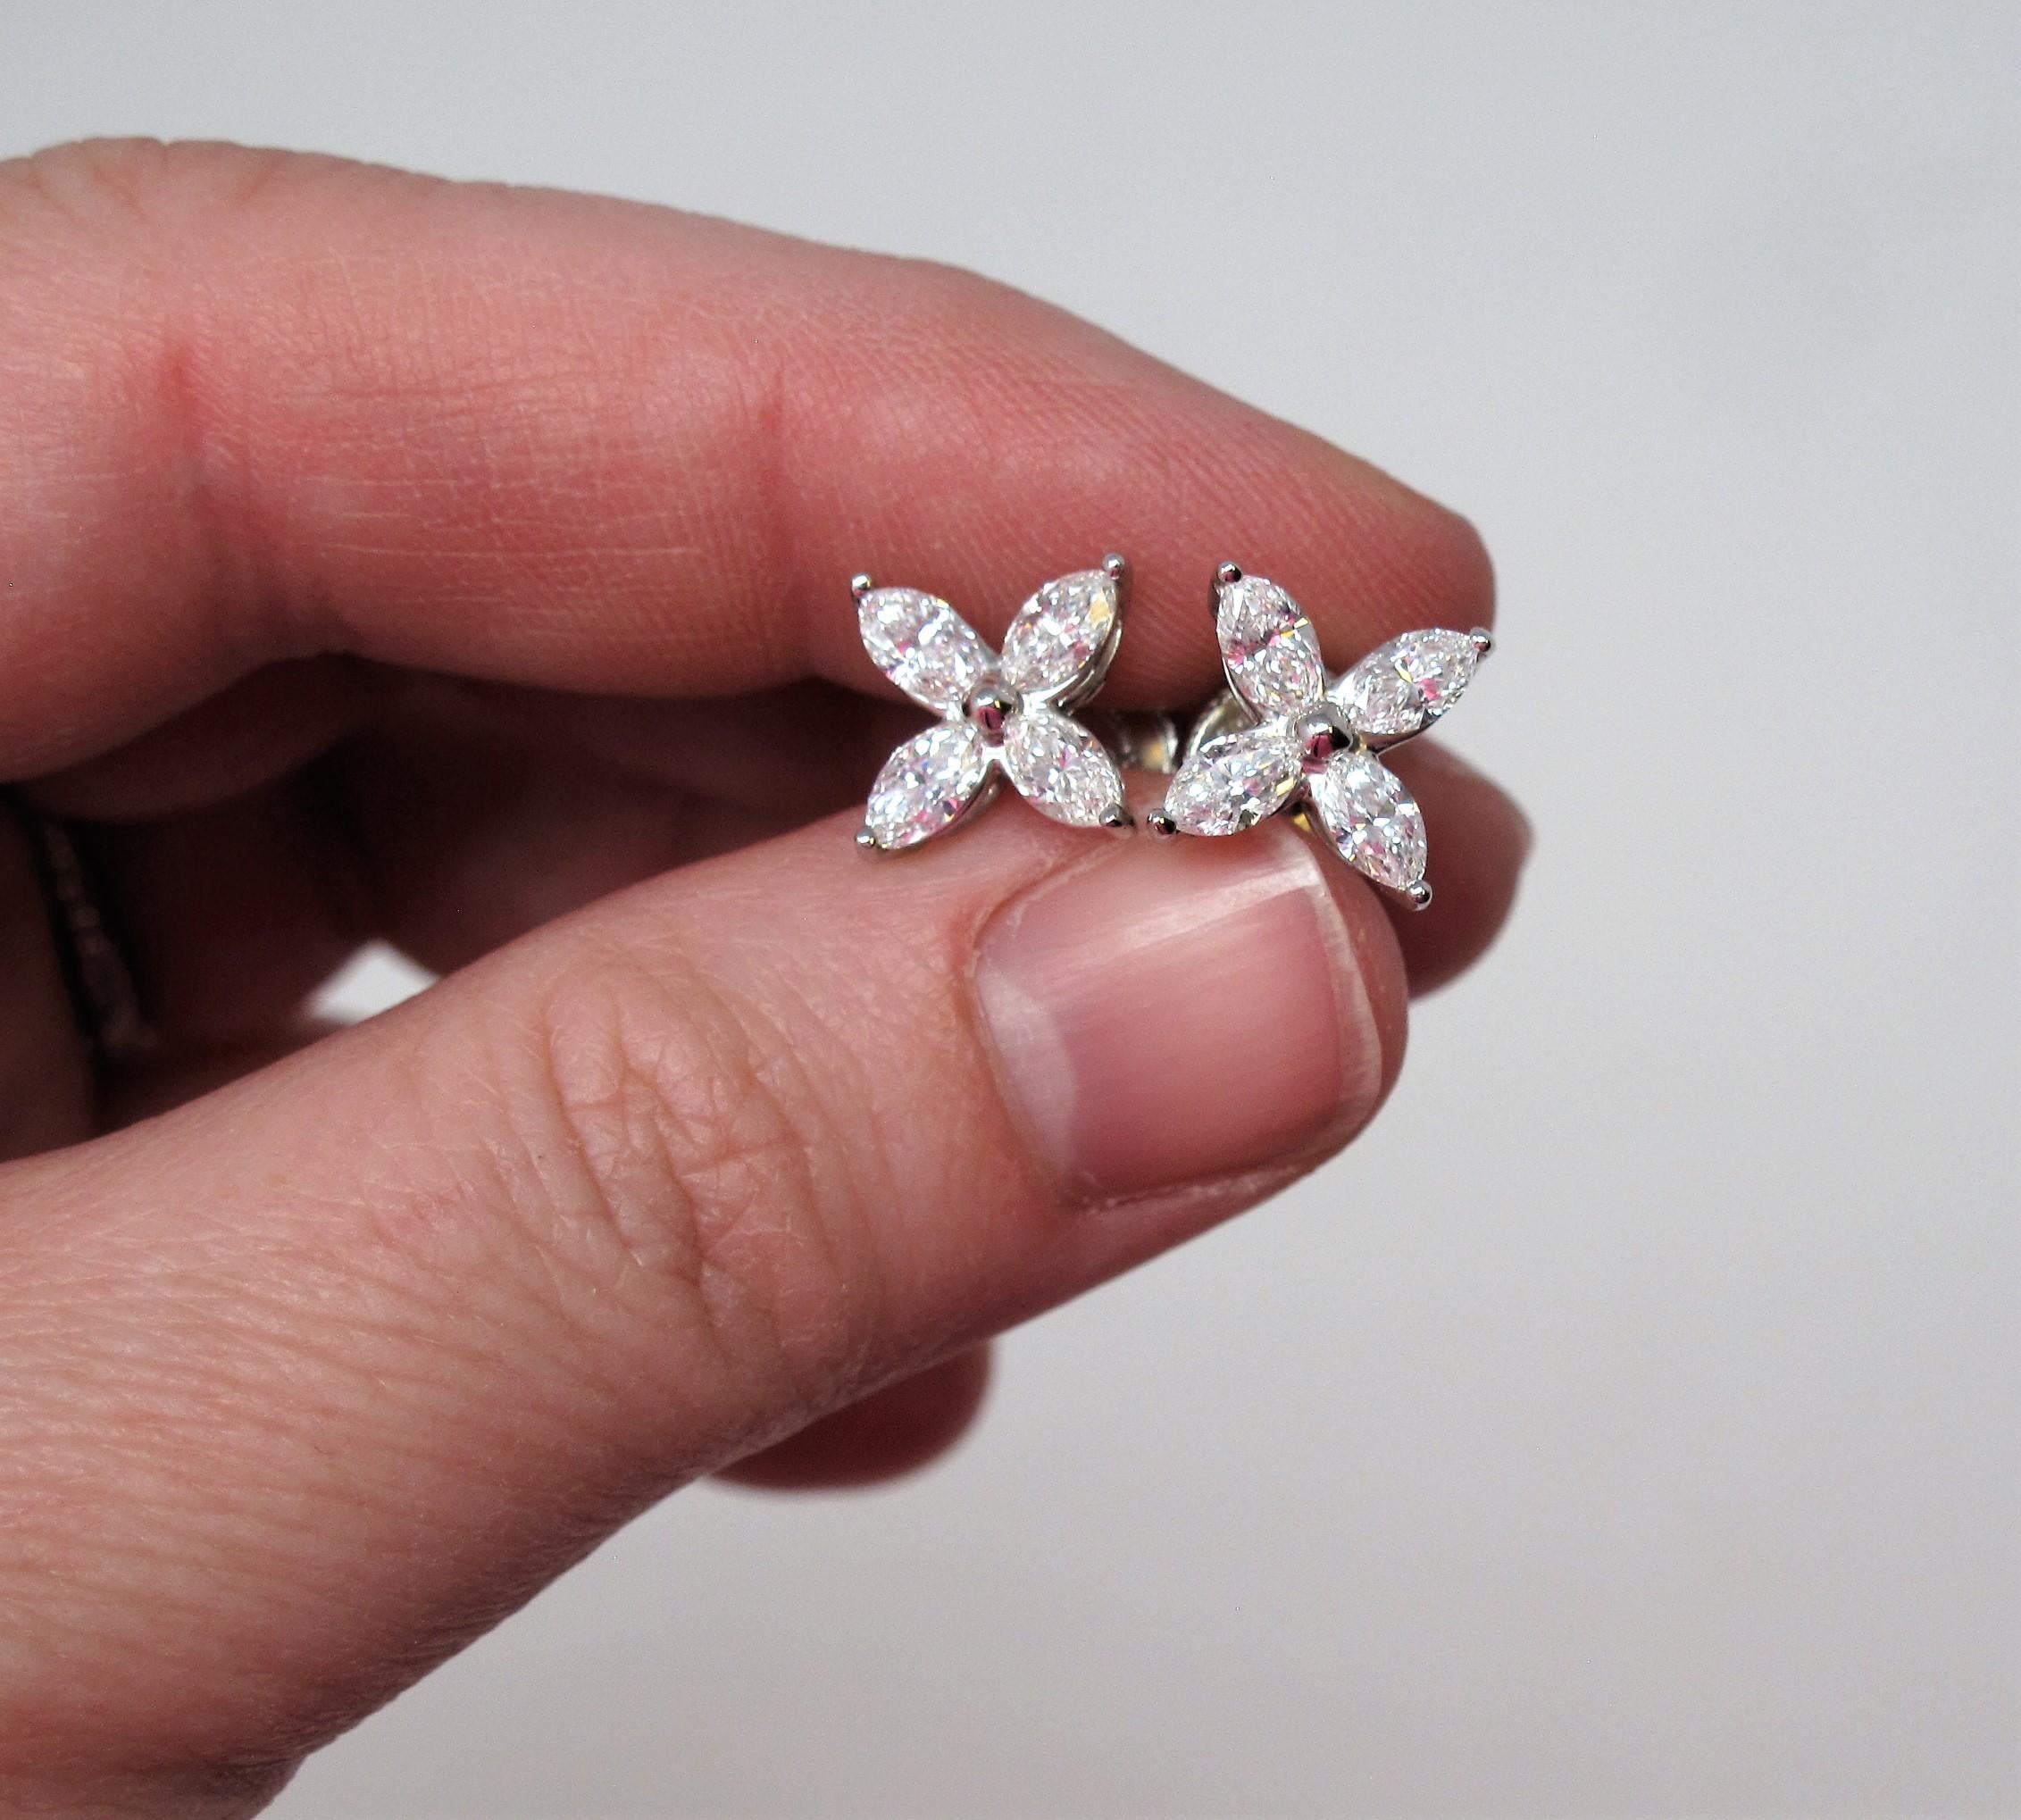 Tiffany & Co. Large Victoria Diamond Earrings in Platinum 1.61 Carat Total 1